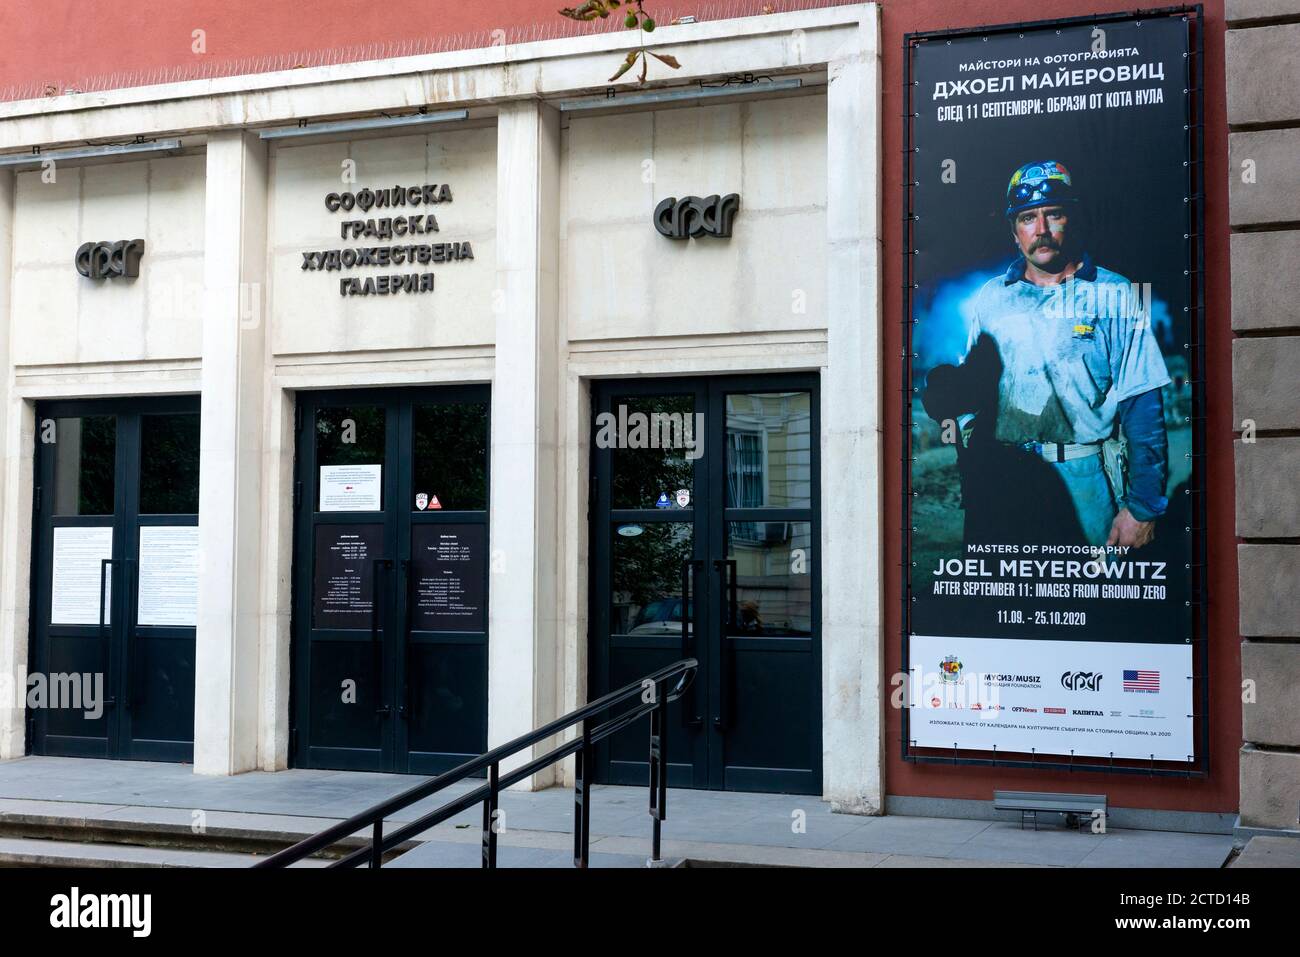 Joel Meyerowitz exhibition billboard poster for the 'After September 11: Images from Ground Zero' show at the Sofia City Art Gallery in Sofia Bulgaria Stock Photo